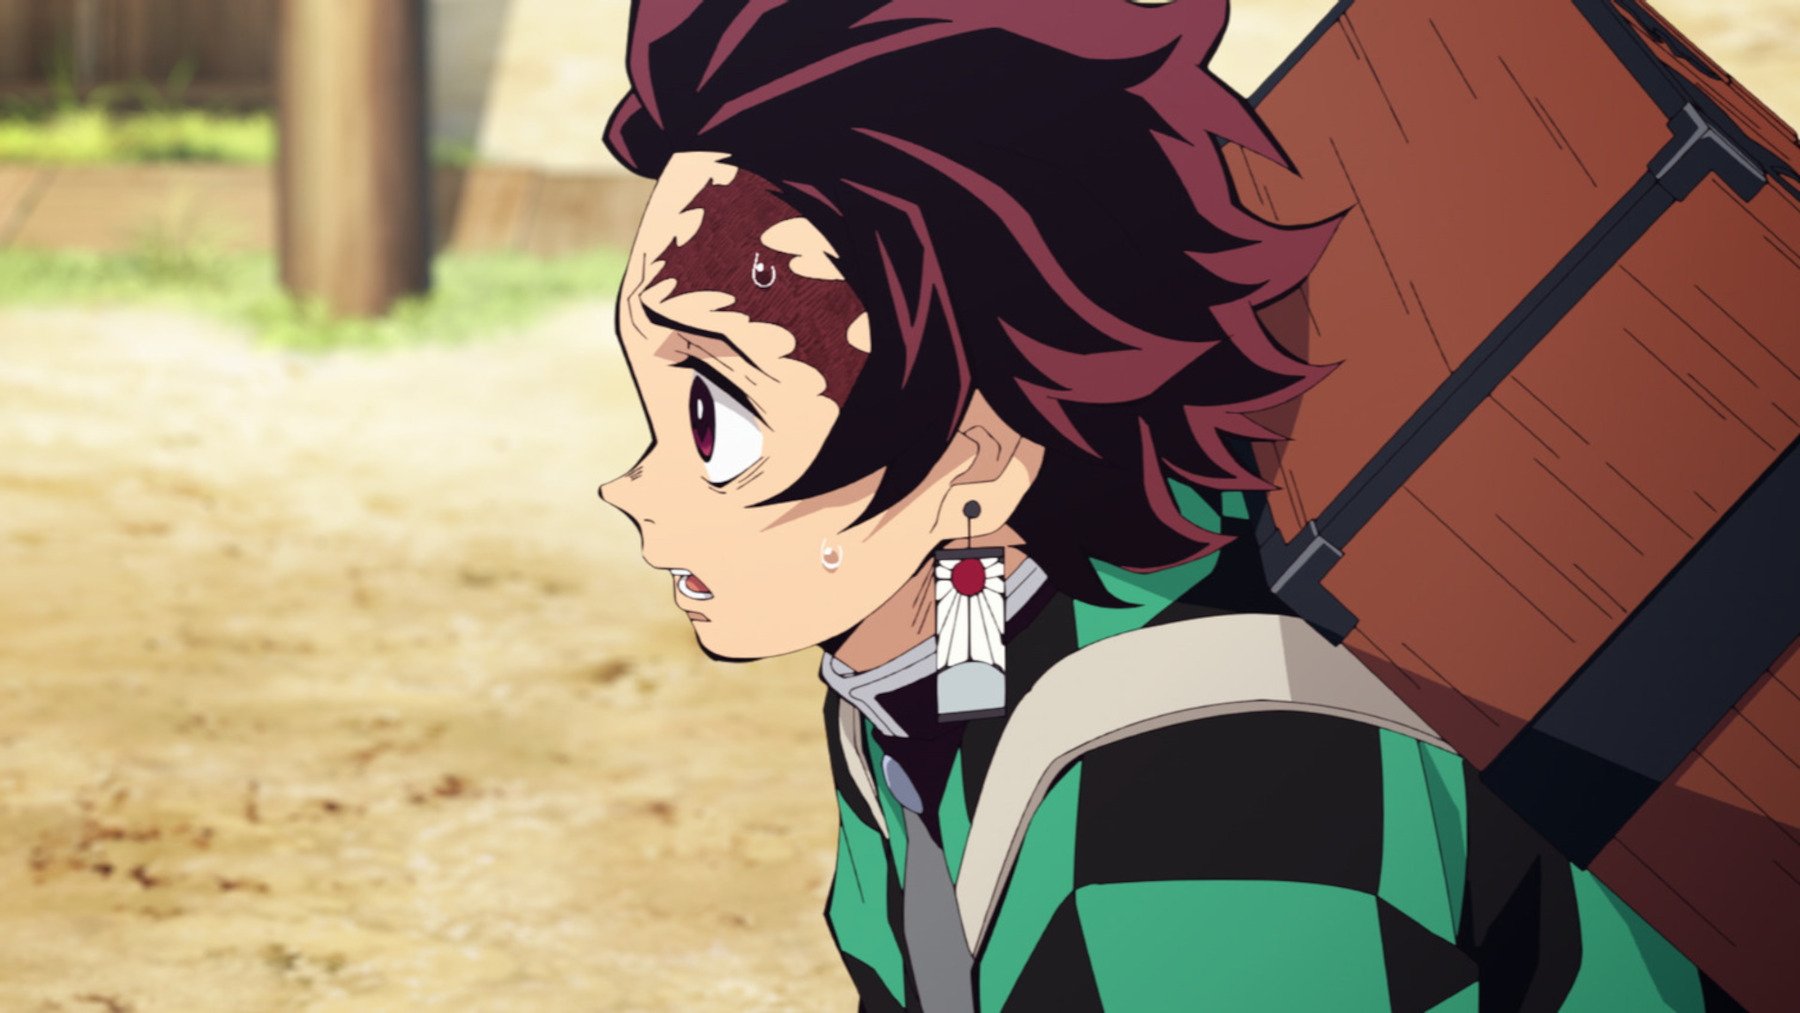 Tanjiro in episode 1 of 'Demon Slayer' Season 2's Entertainment District Arc. The image shows his side profile, and he's looking at something off-screen.